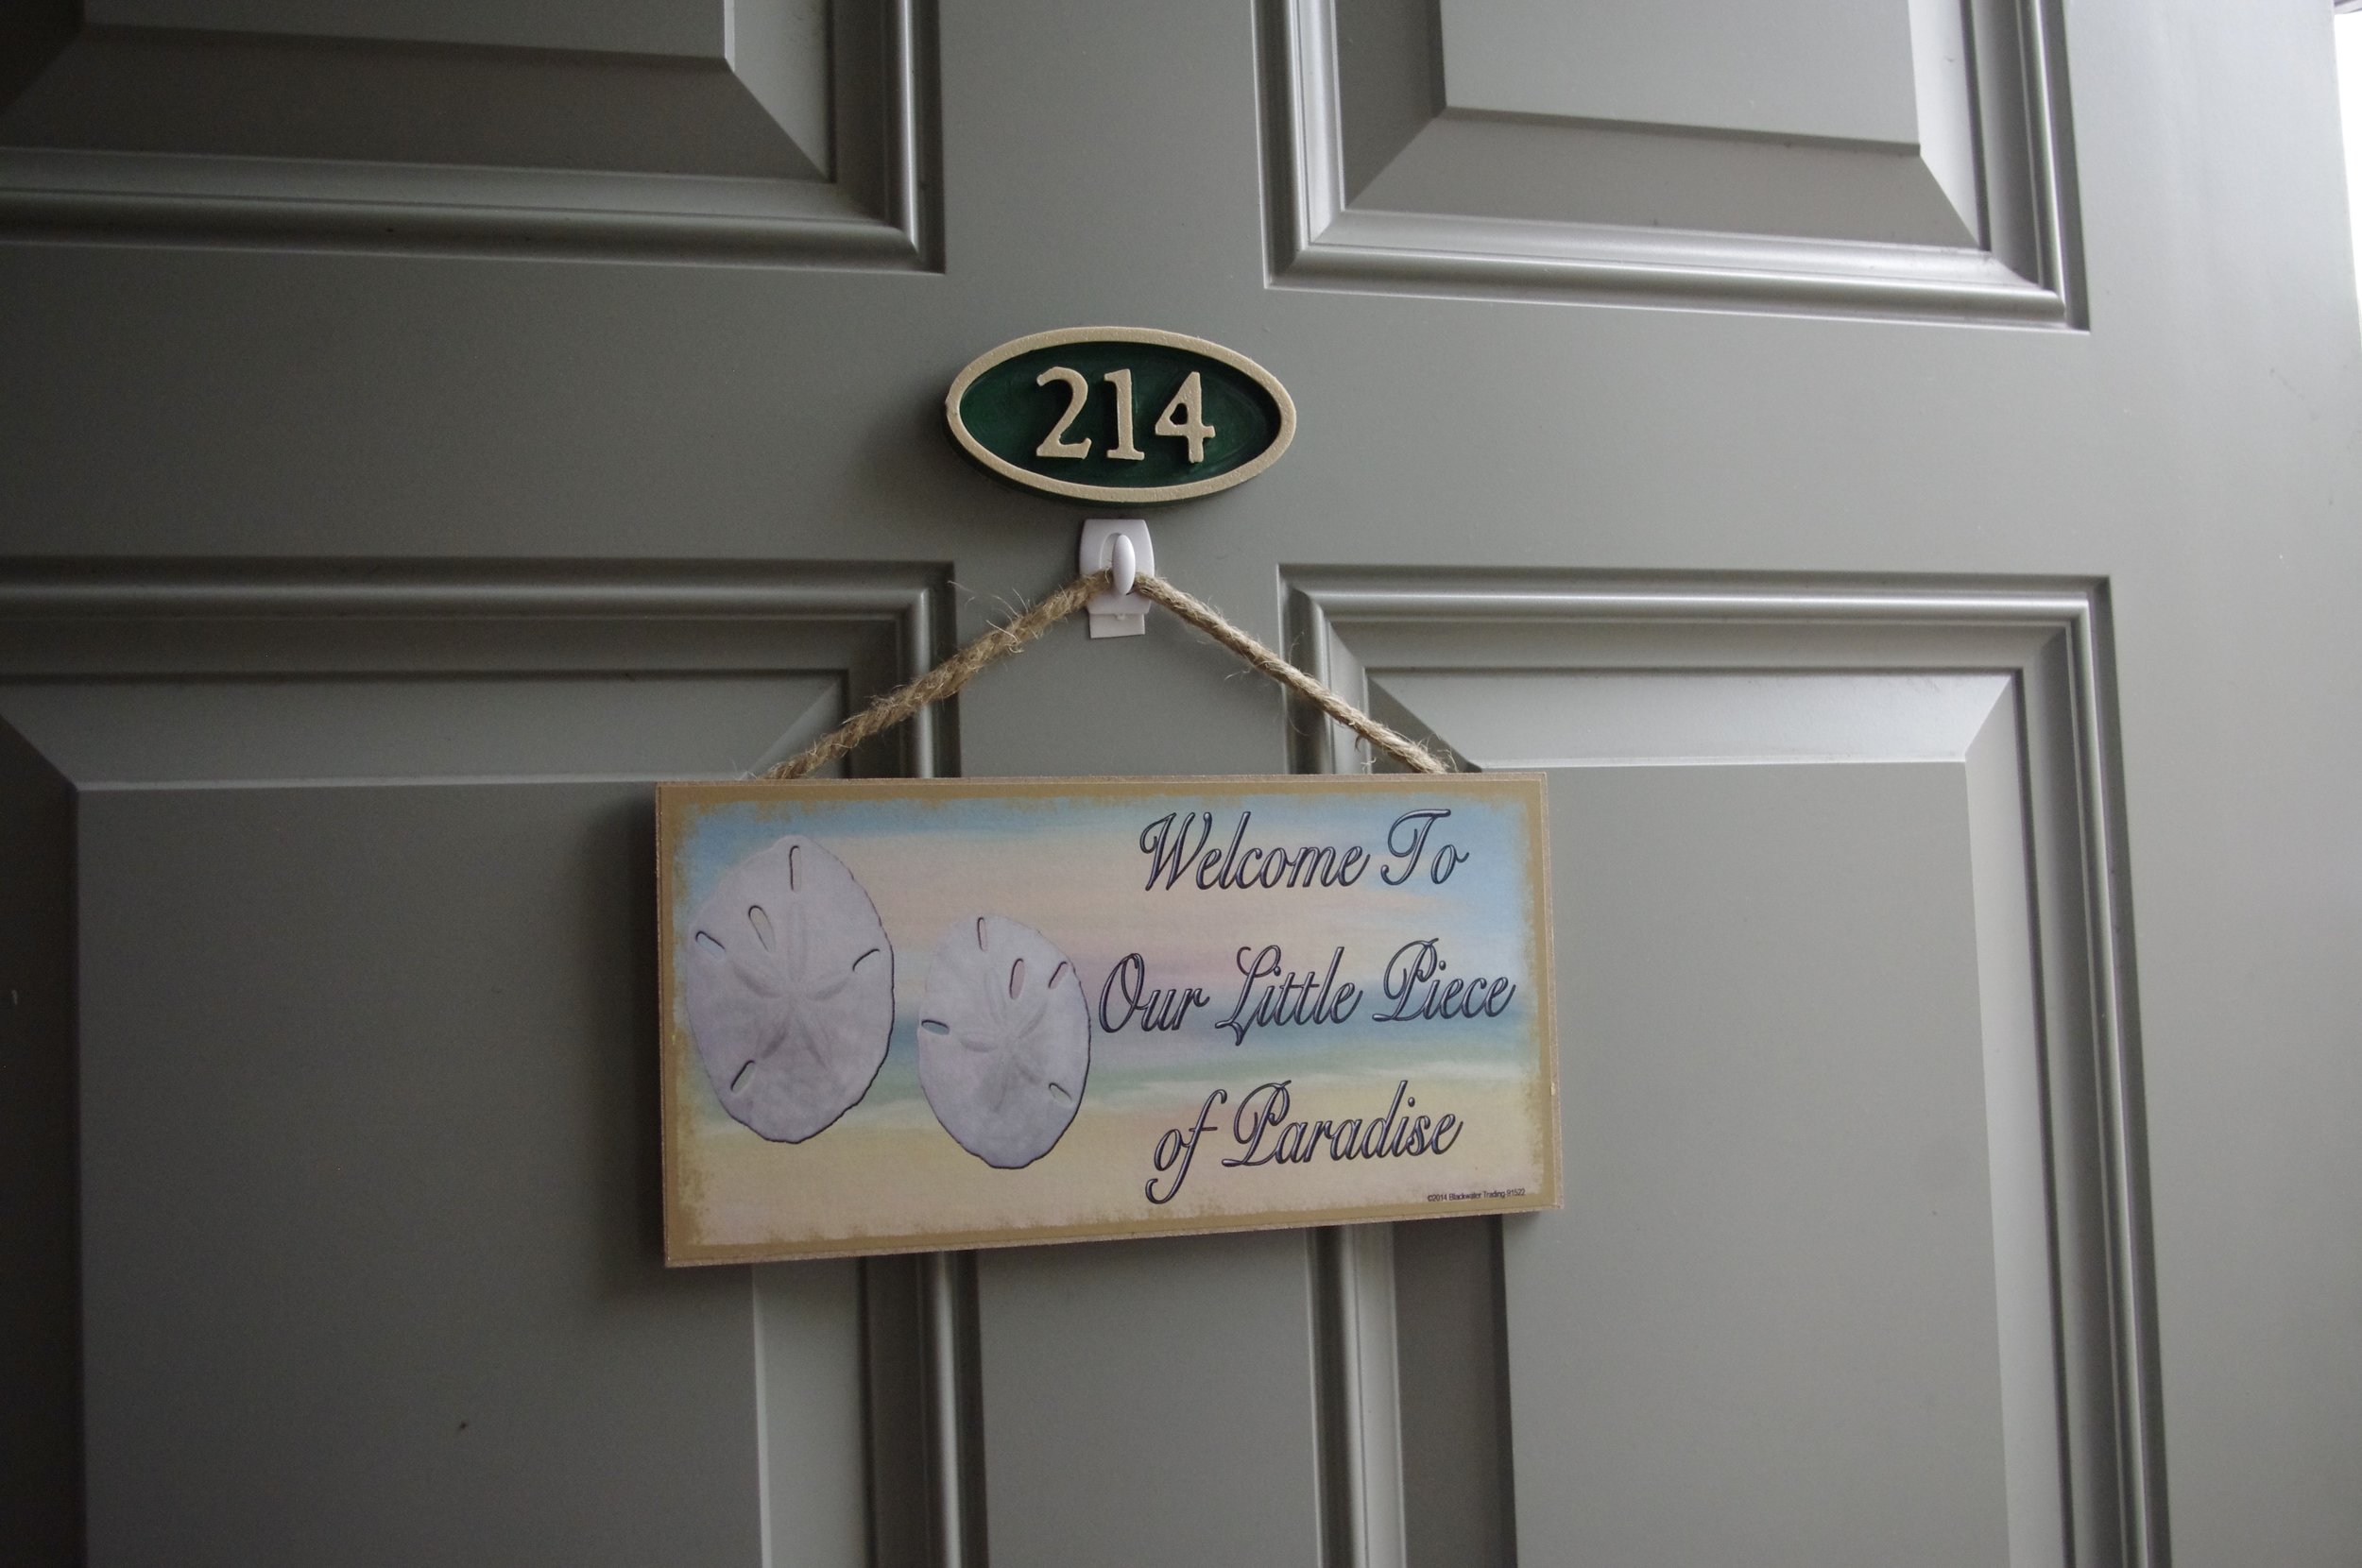 WELCOME TO SAND POINTE 214, THE SANIBEL BLUE LAGOON